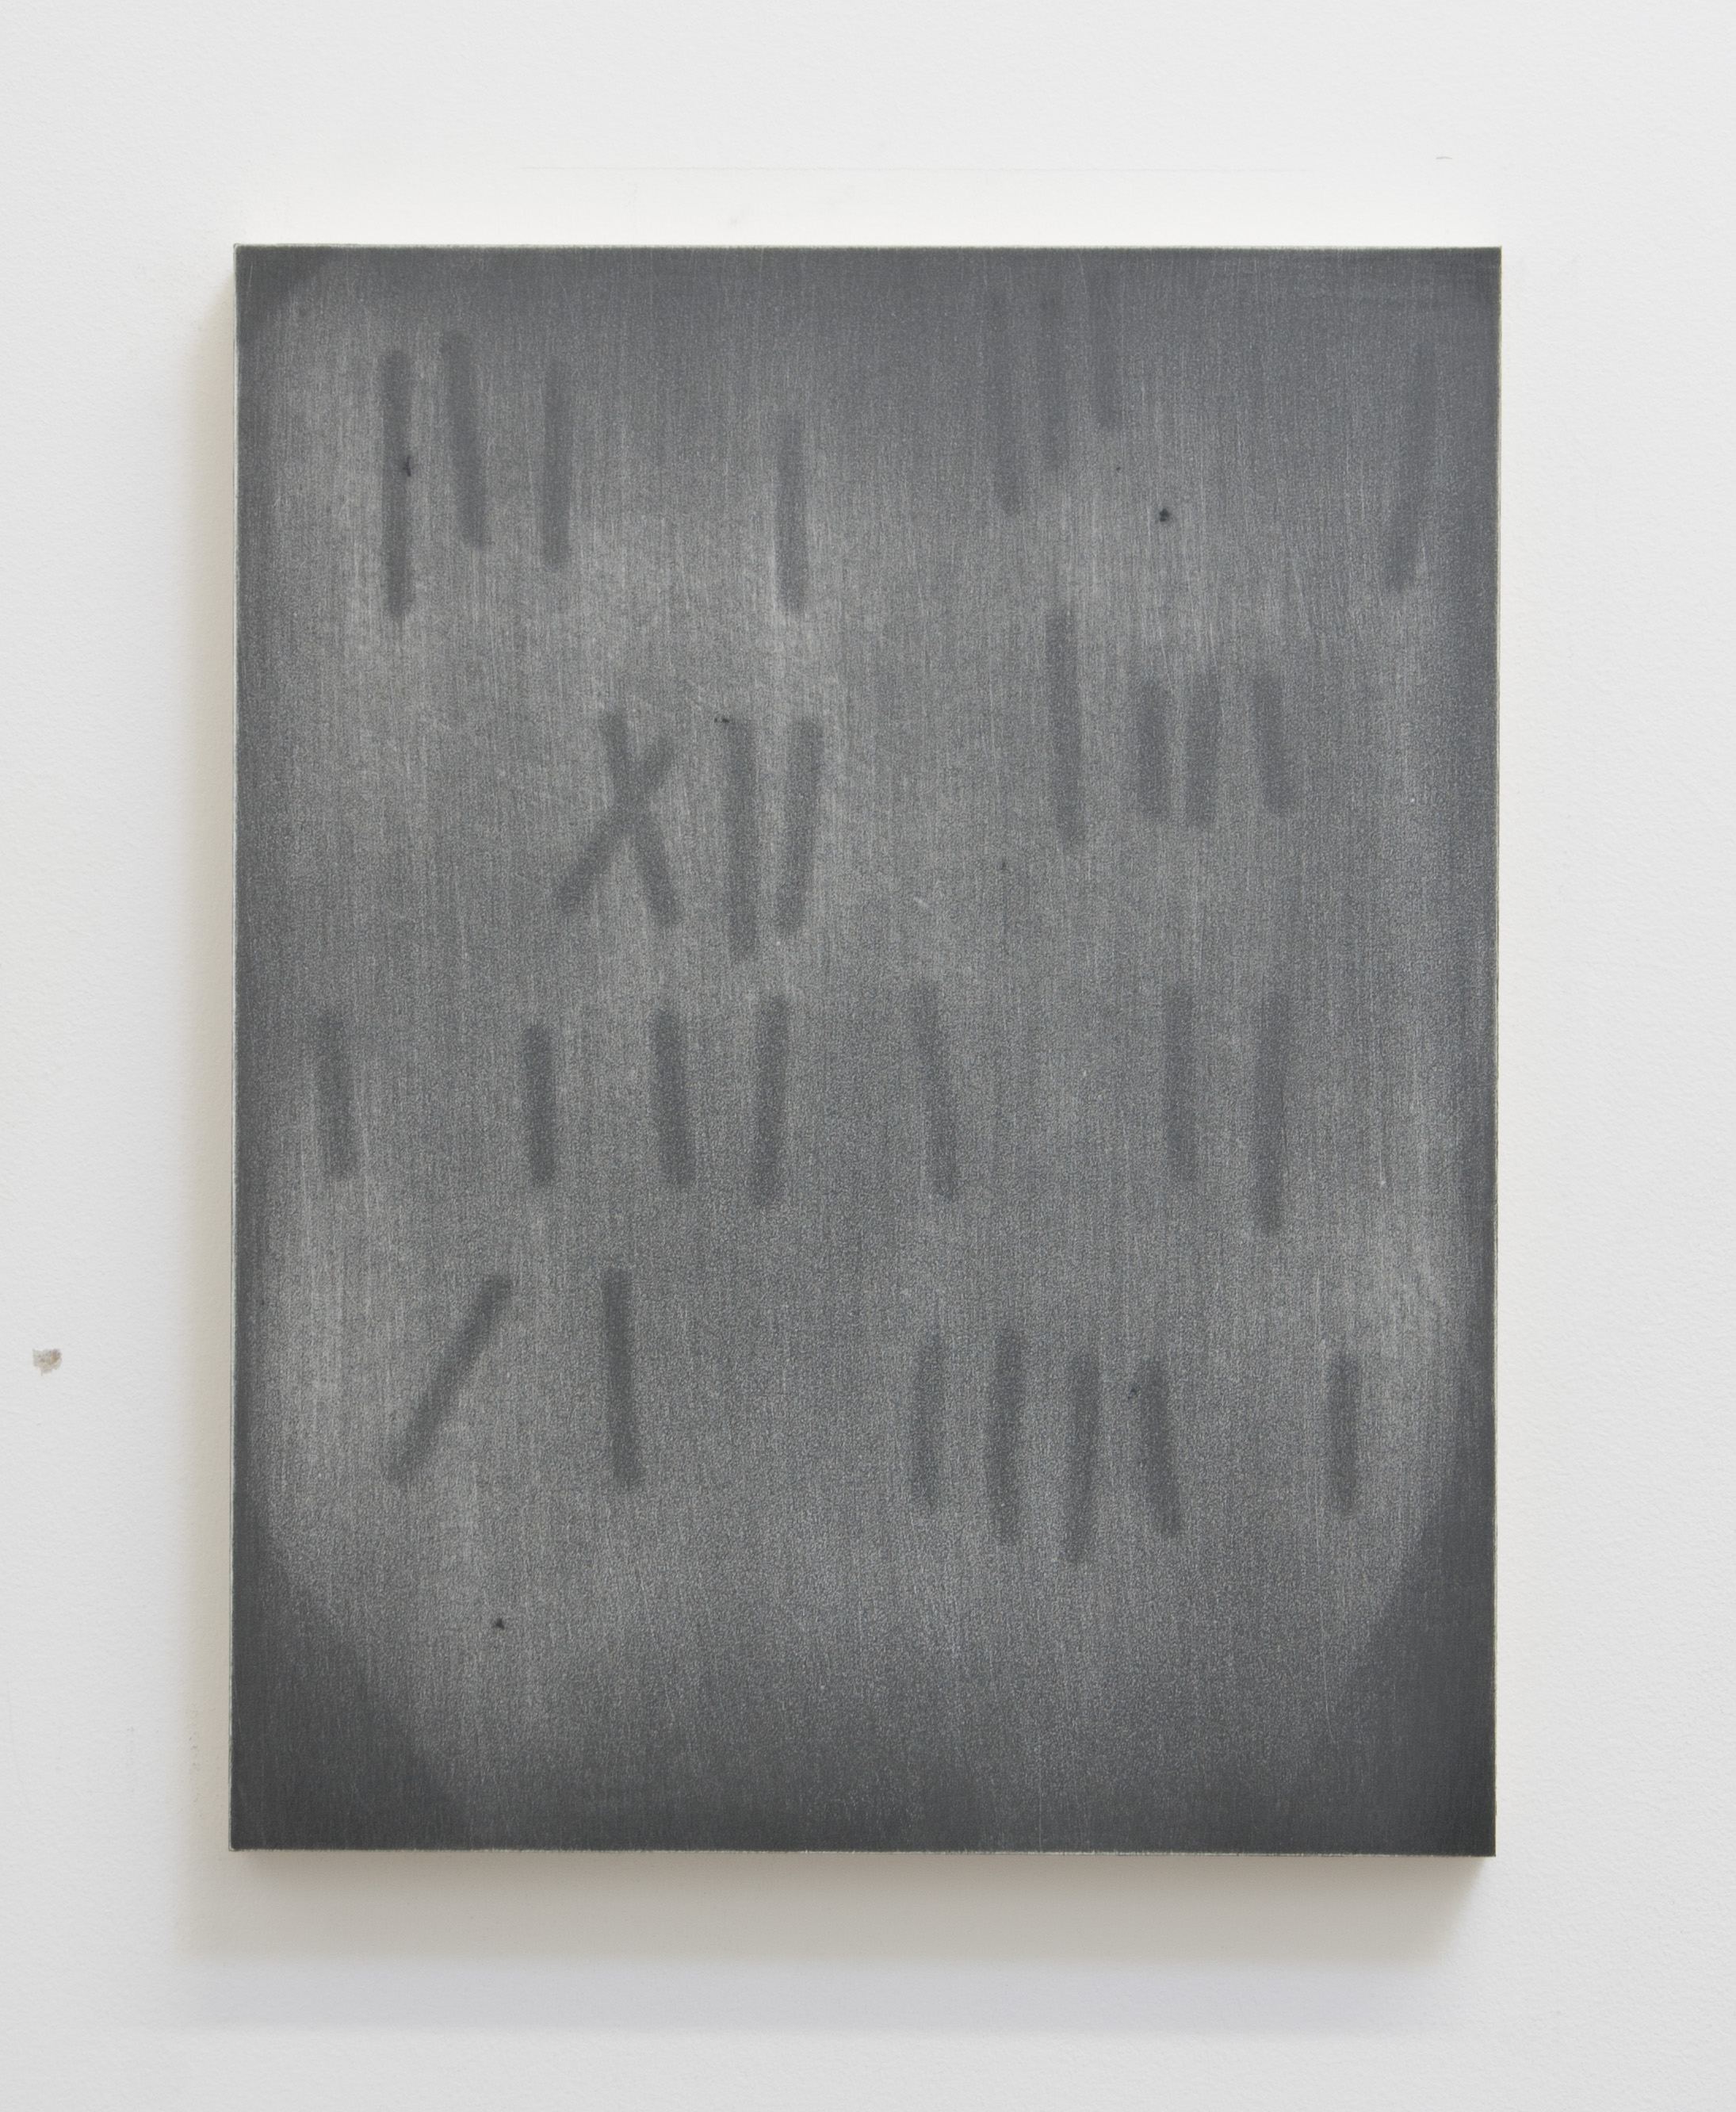  Thirty, 2015  Acrylic on panel, 14 x 11 inches 